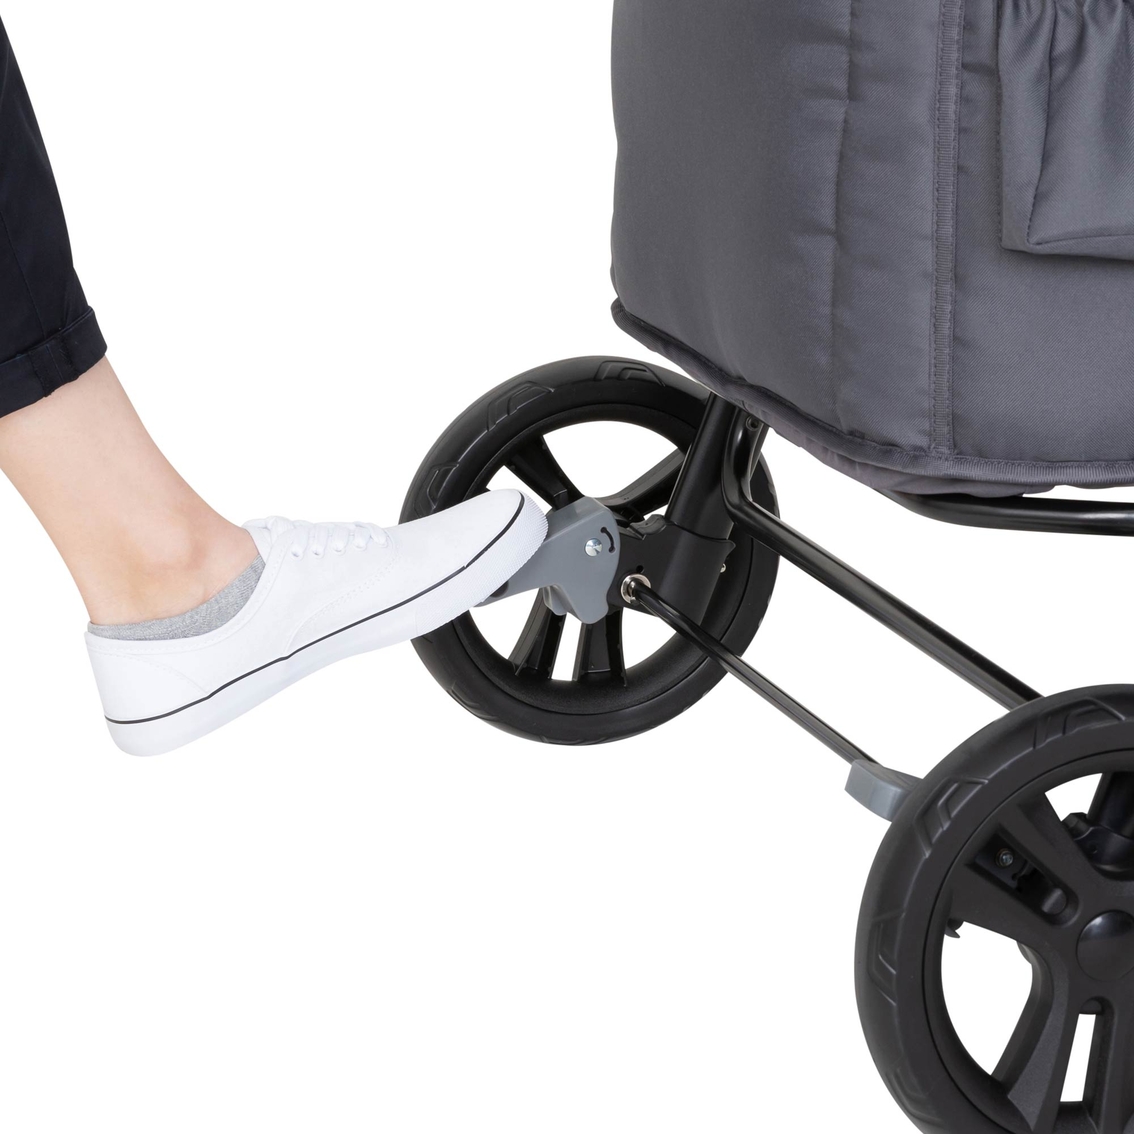 Baby Trend Tour LTE 2-in-1 Stroller Wagon - Image 7 of 10